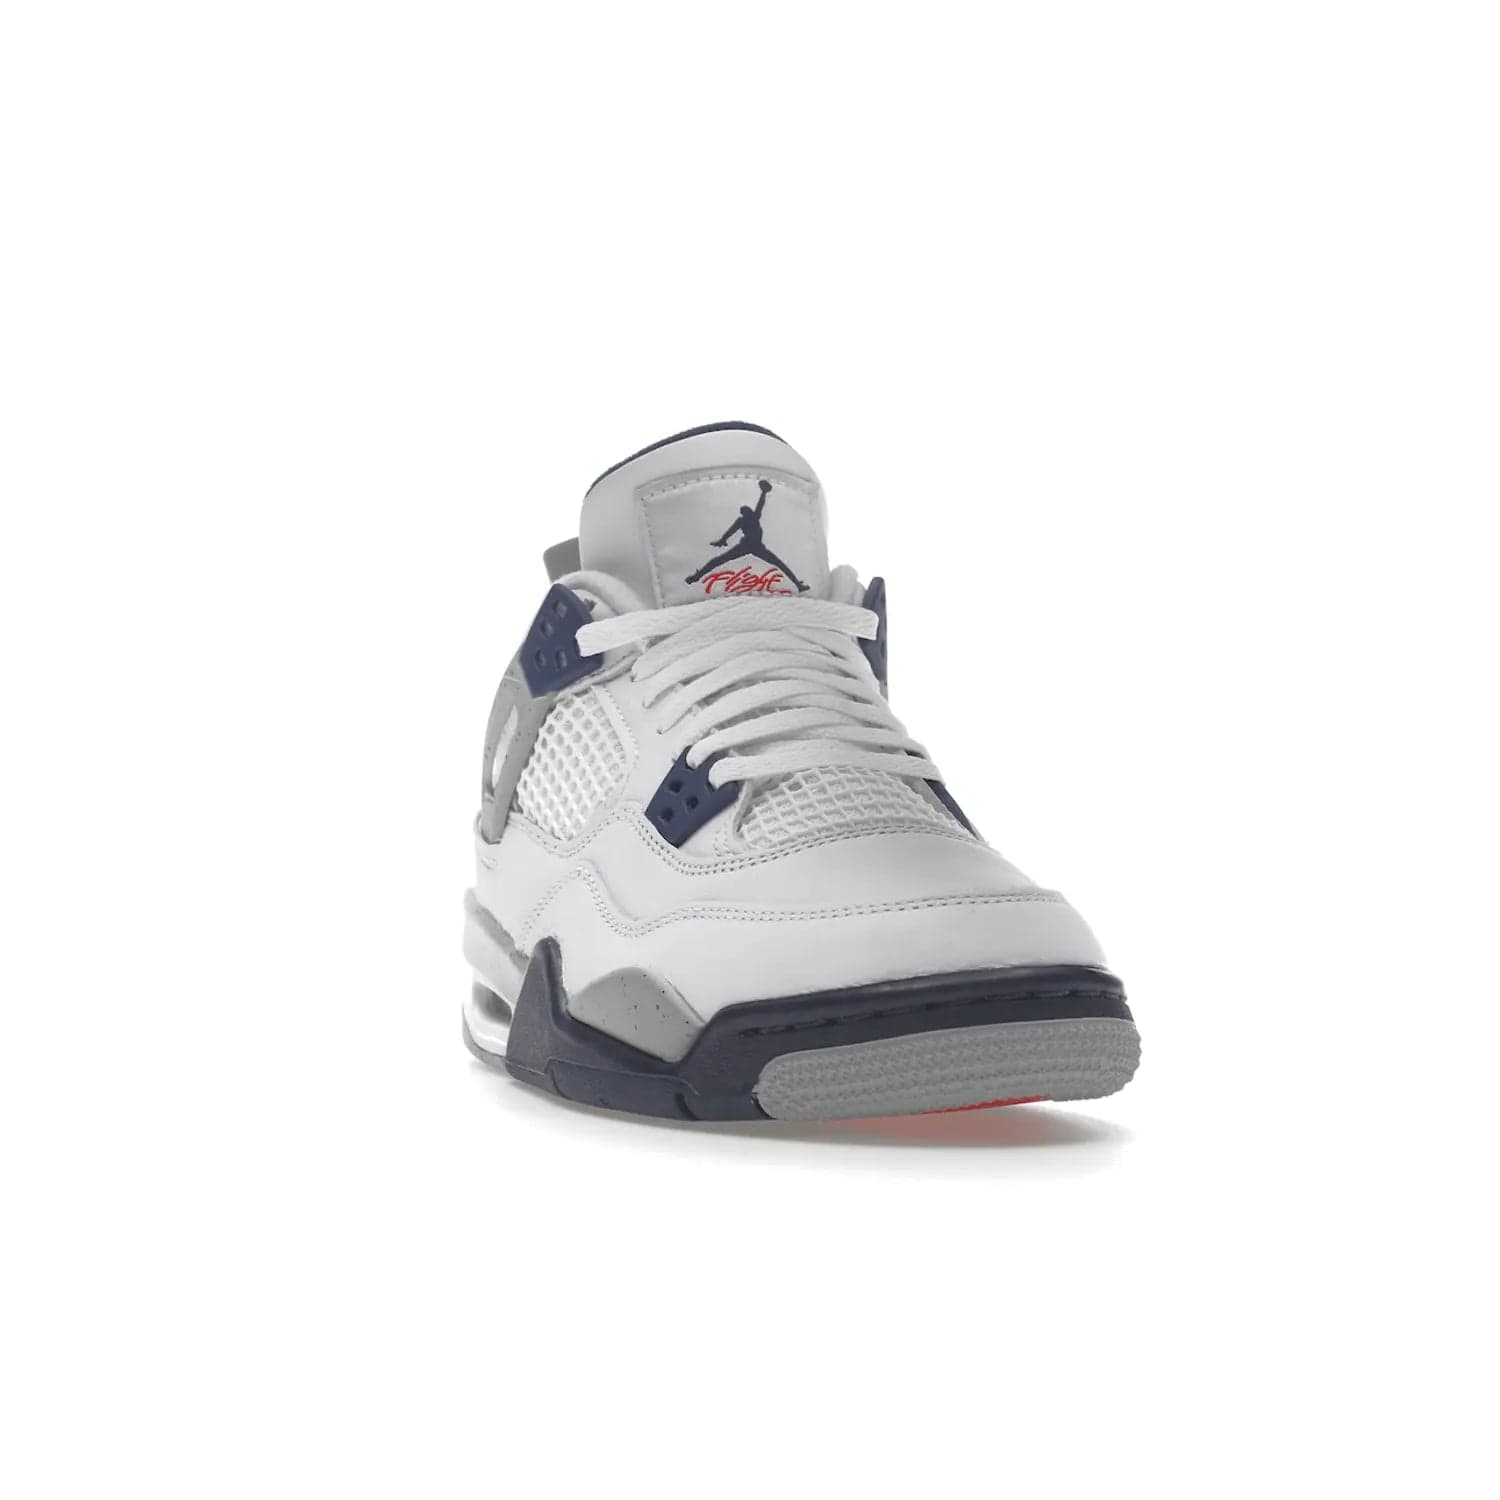 Jordan 4 Retro Midnight Navy (GS) - Image 8 - Only at www.BallersClubKickz.com - Shop the Air Jordan 4 Retro Midnight Navy GS. The white leather upper features black support wings & heel tab, navy eyelets & woven tongue tag with Jumpman logos. The midsole features two-tone polyurethane insole & AIR units in the heel & forefoot. Get the white/midnight navy/light smoke grey/fire colorway & show off your style.